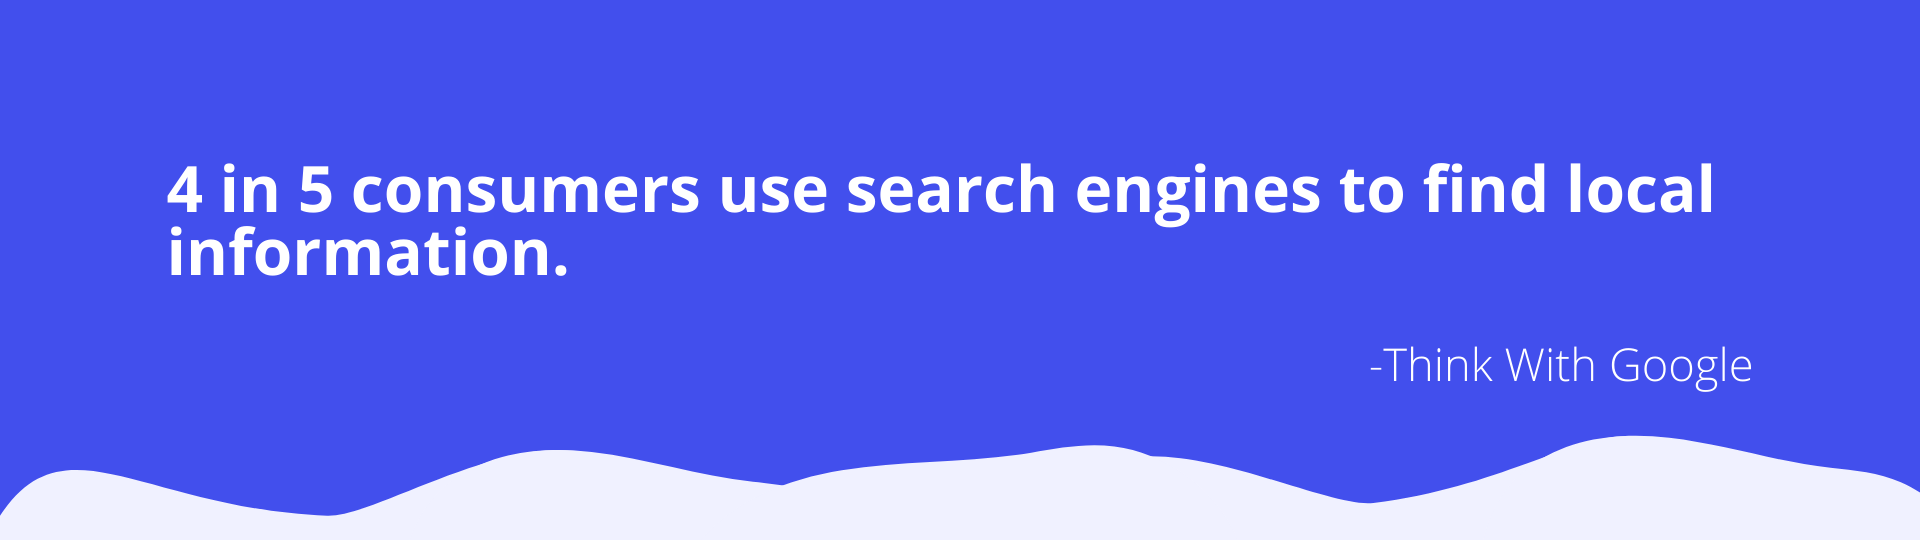 4 in 5 consumers use search engines to find local information. - Agency Jet